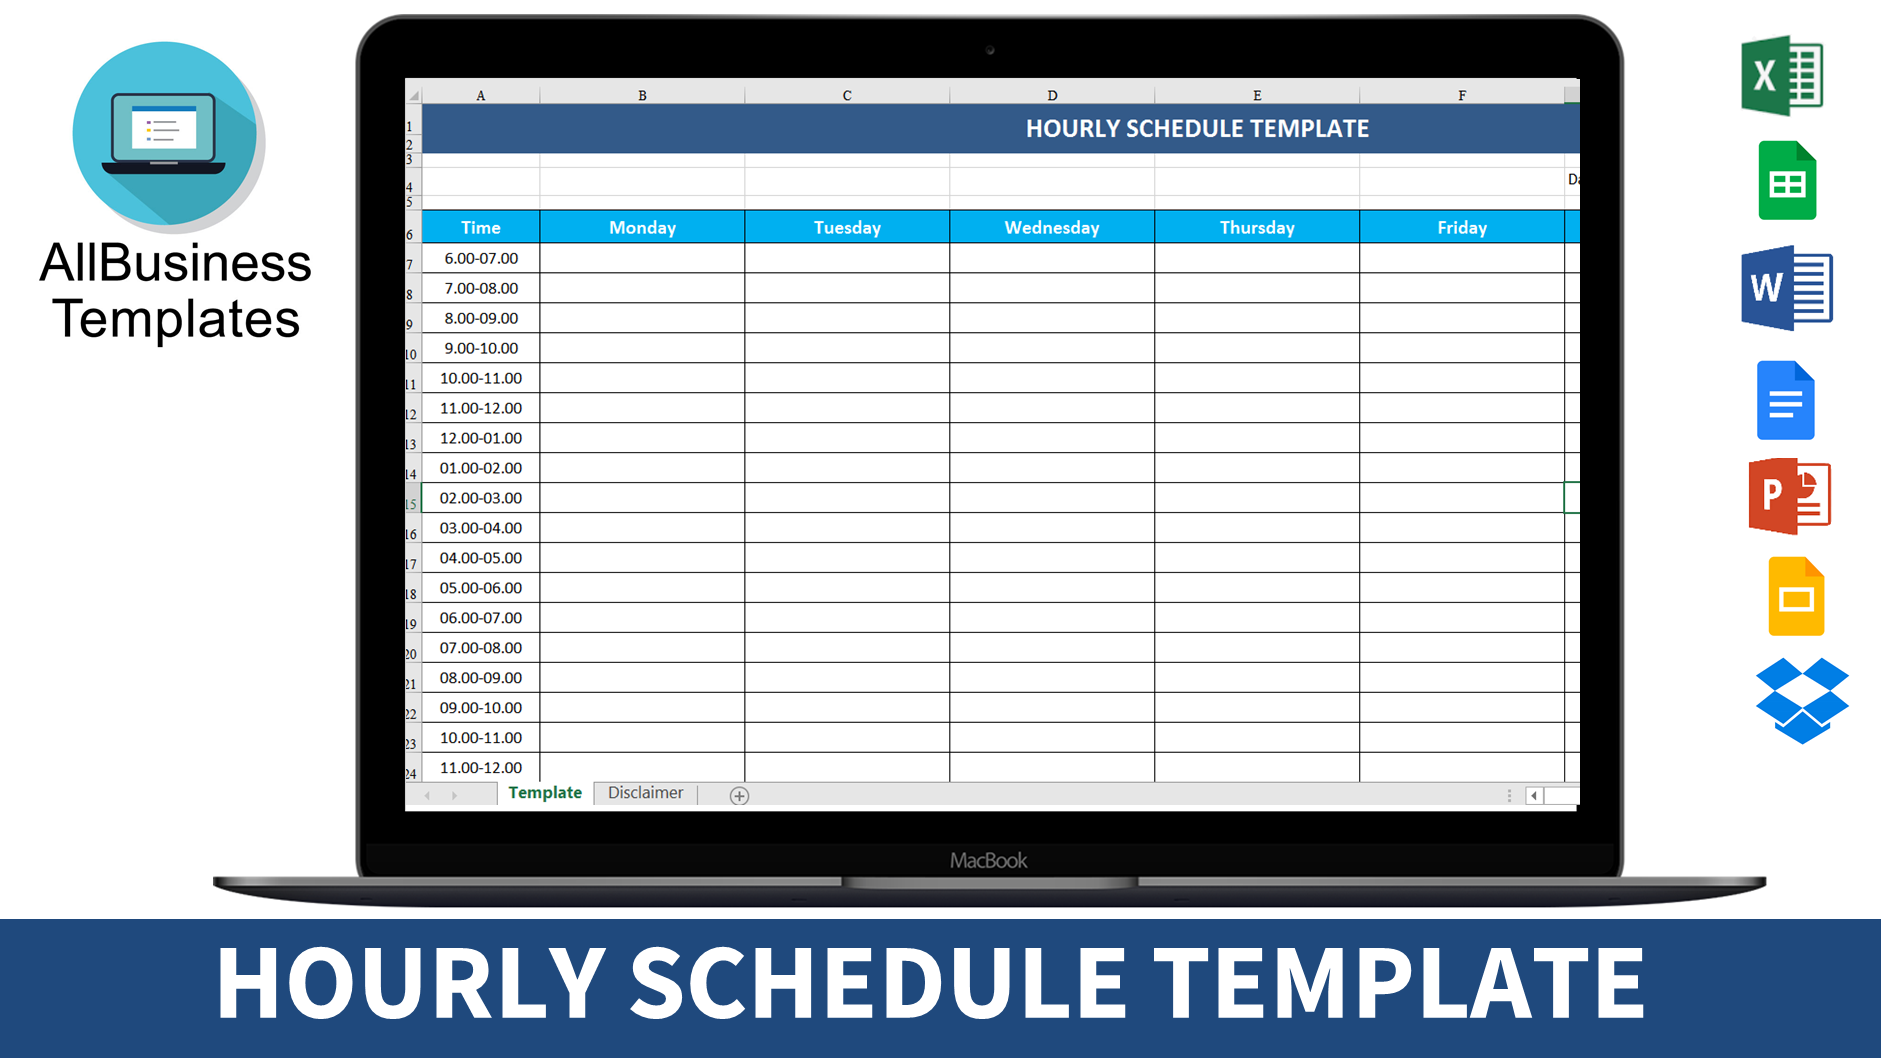 Hourly Schedule Template main image